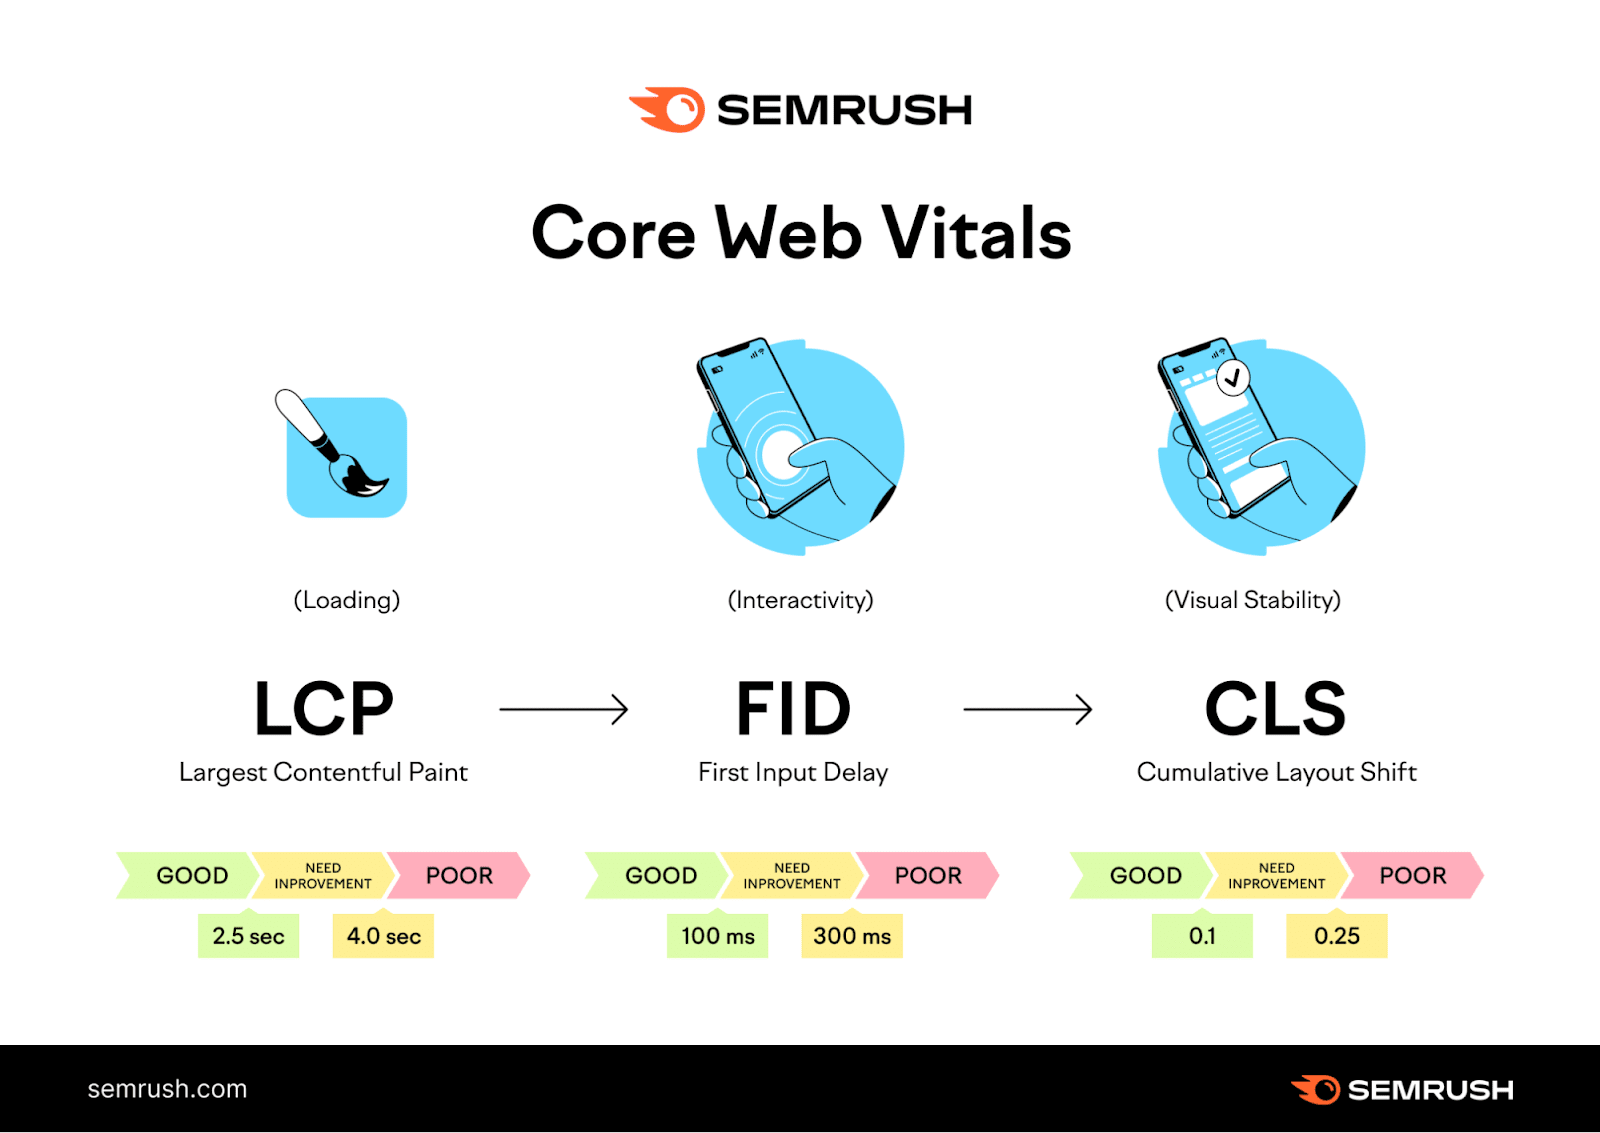 An infographic showing Core Web Vitals and how they are measured